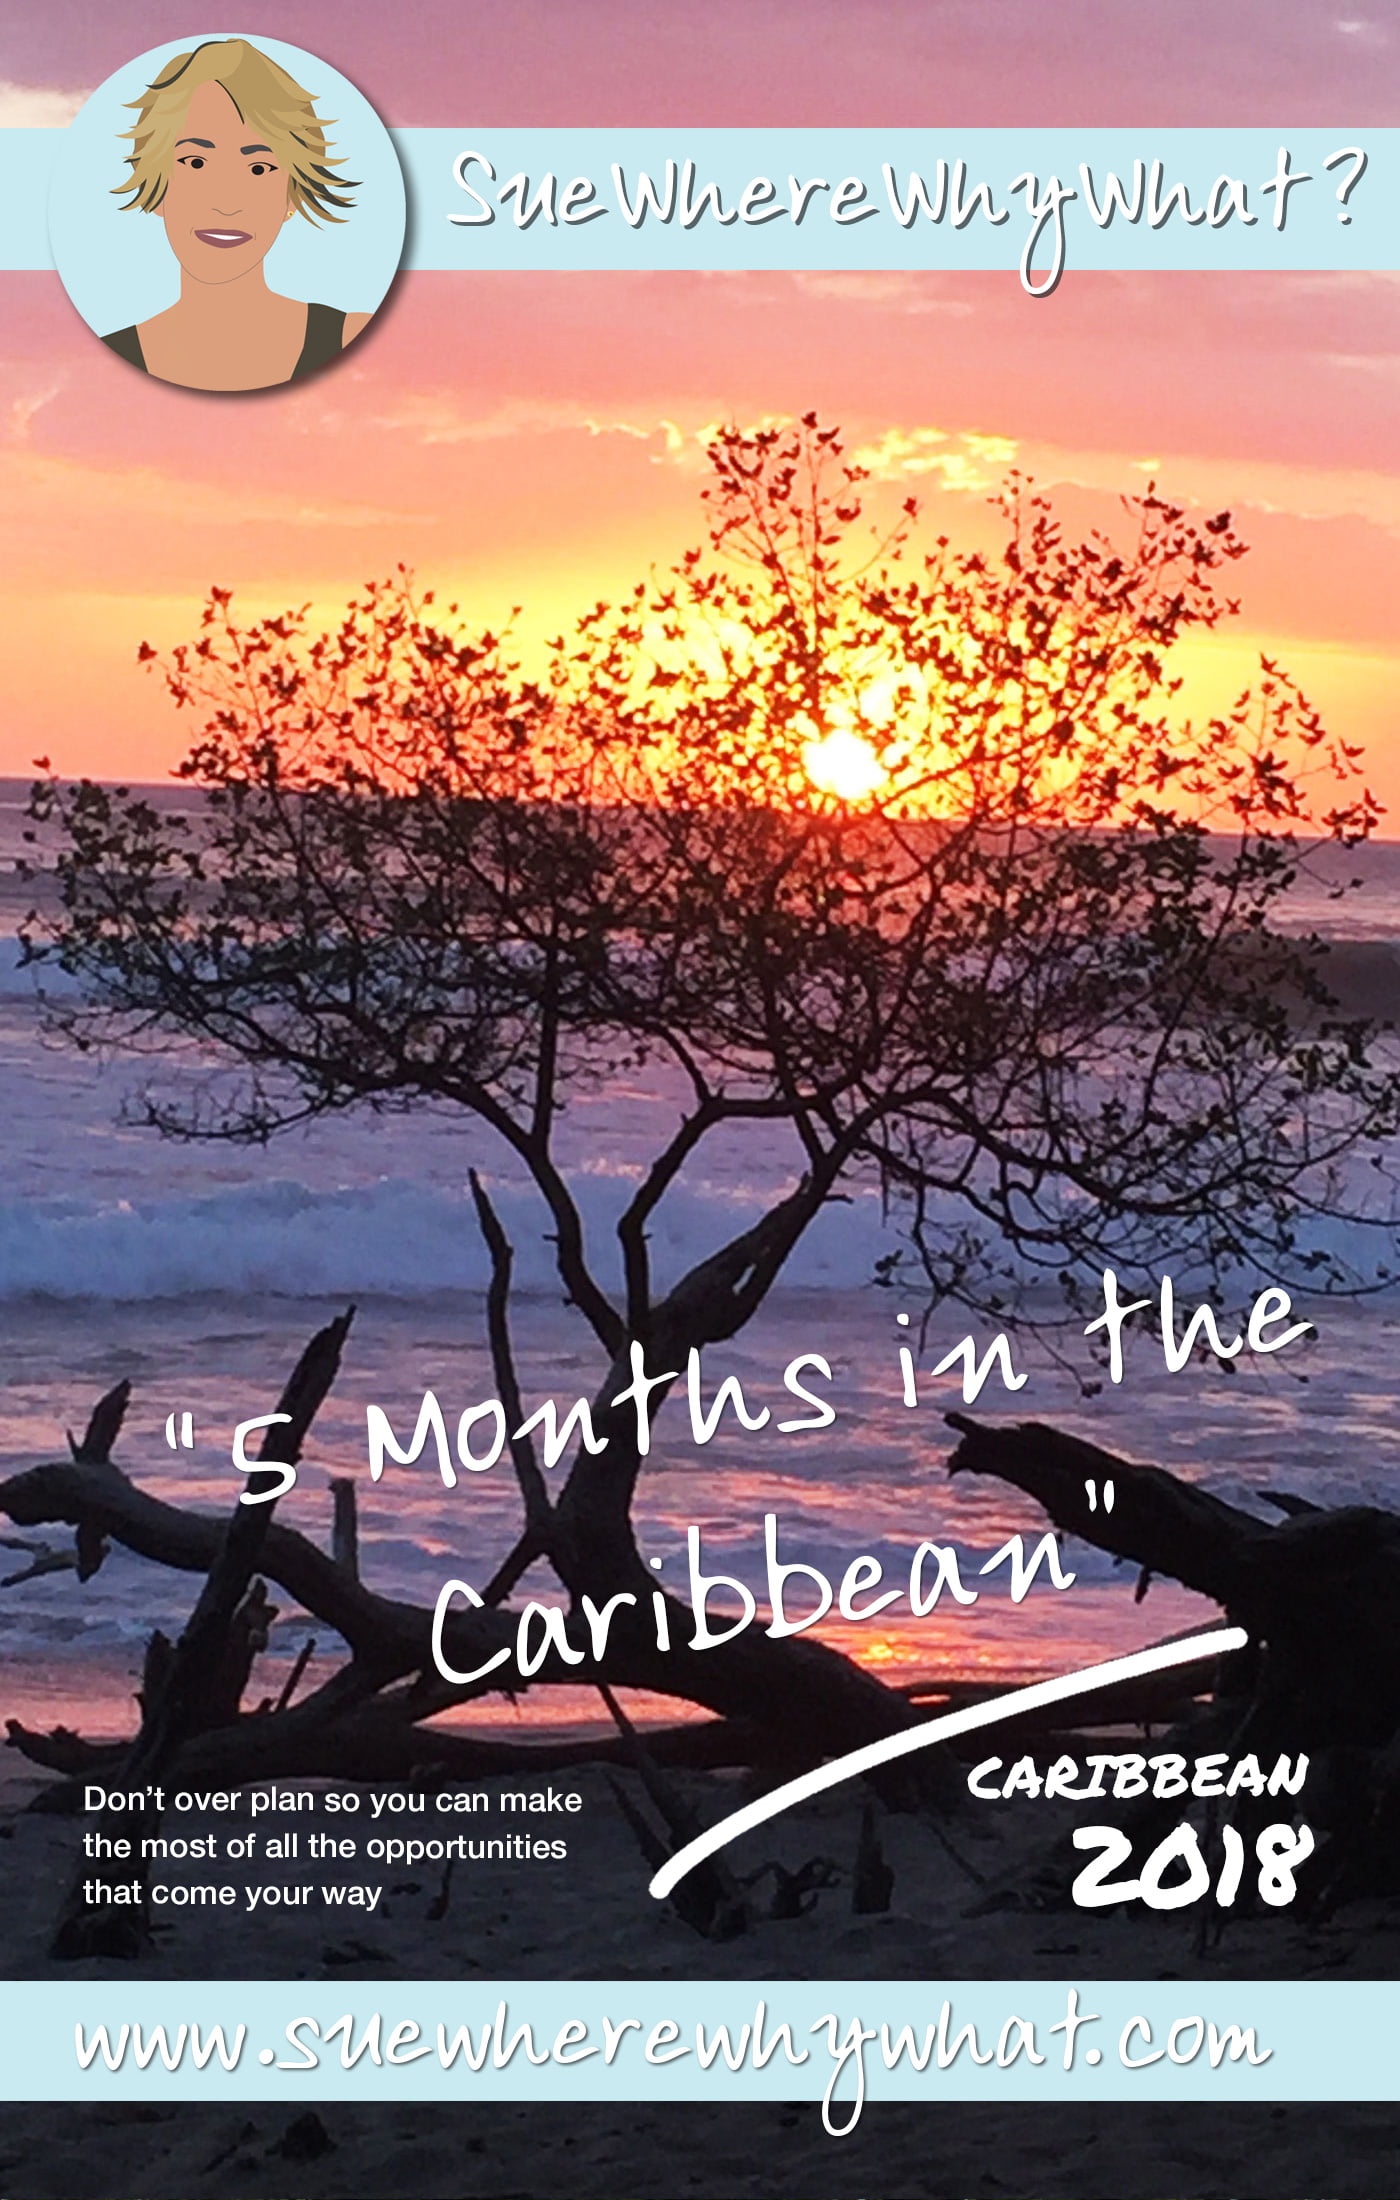 5 Month Self Tour of The Caribbean